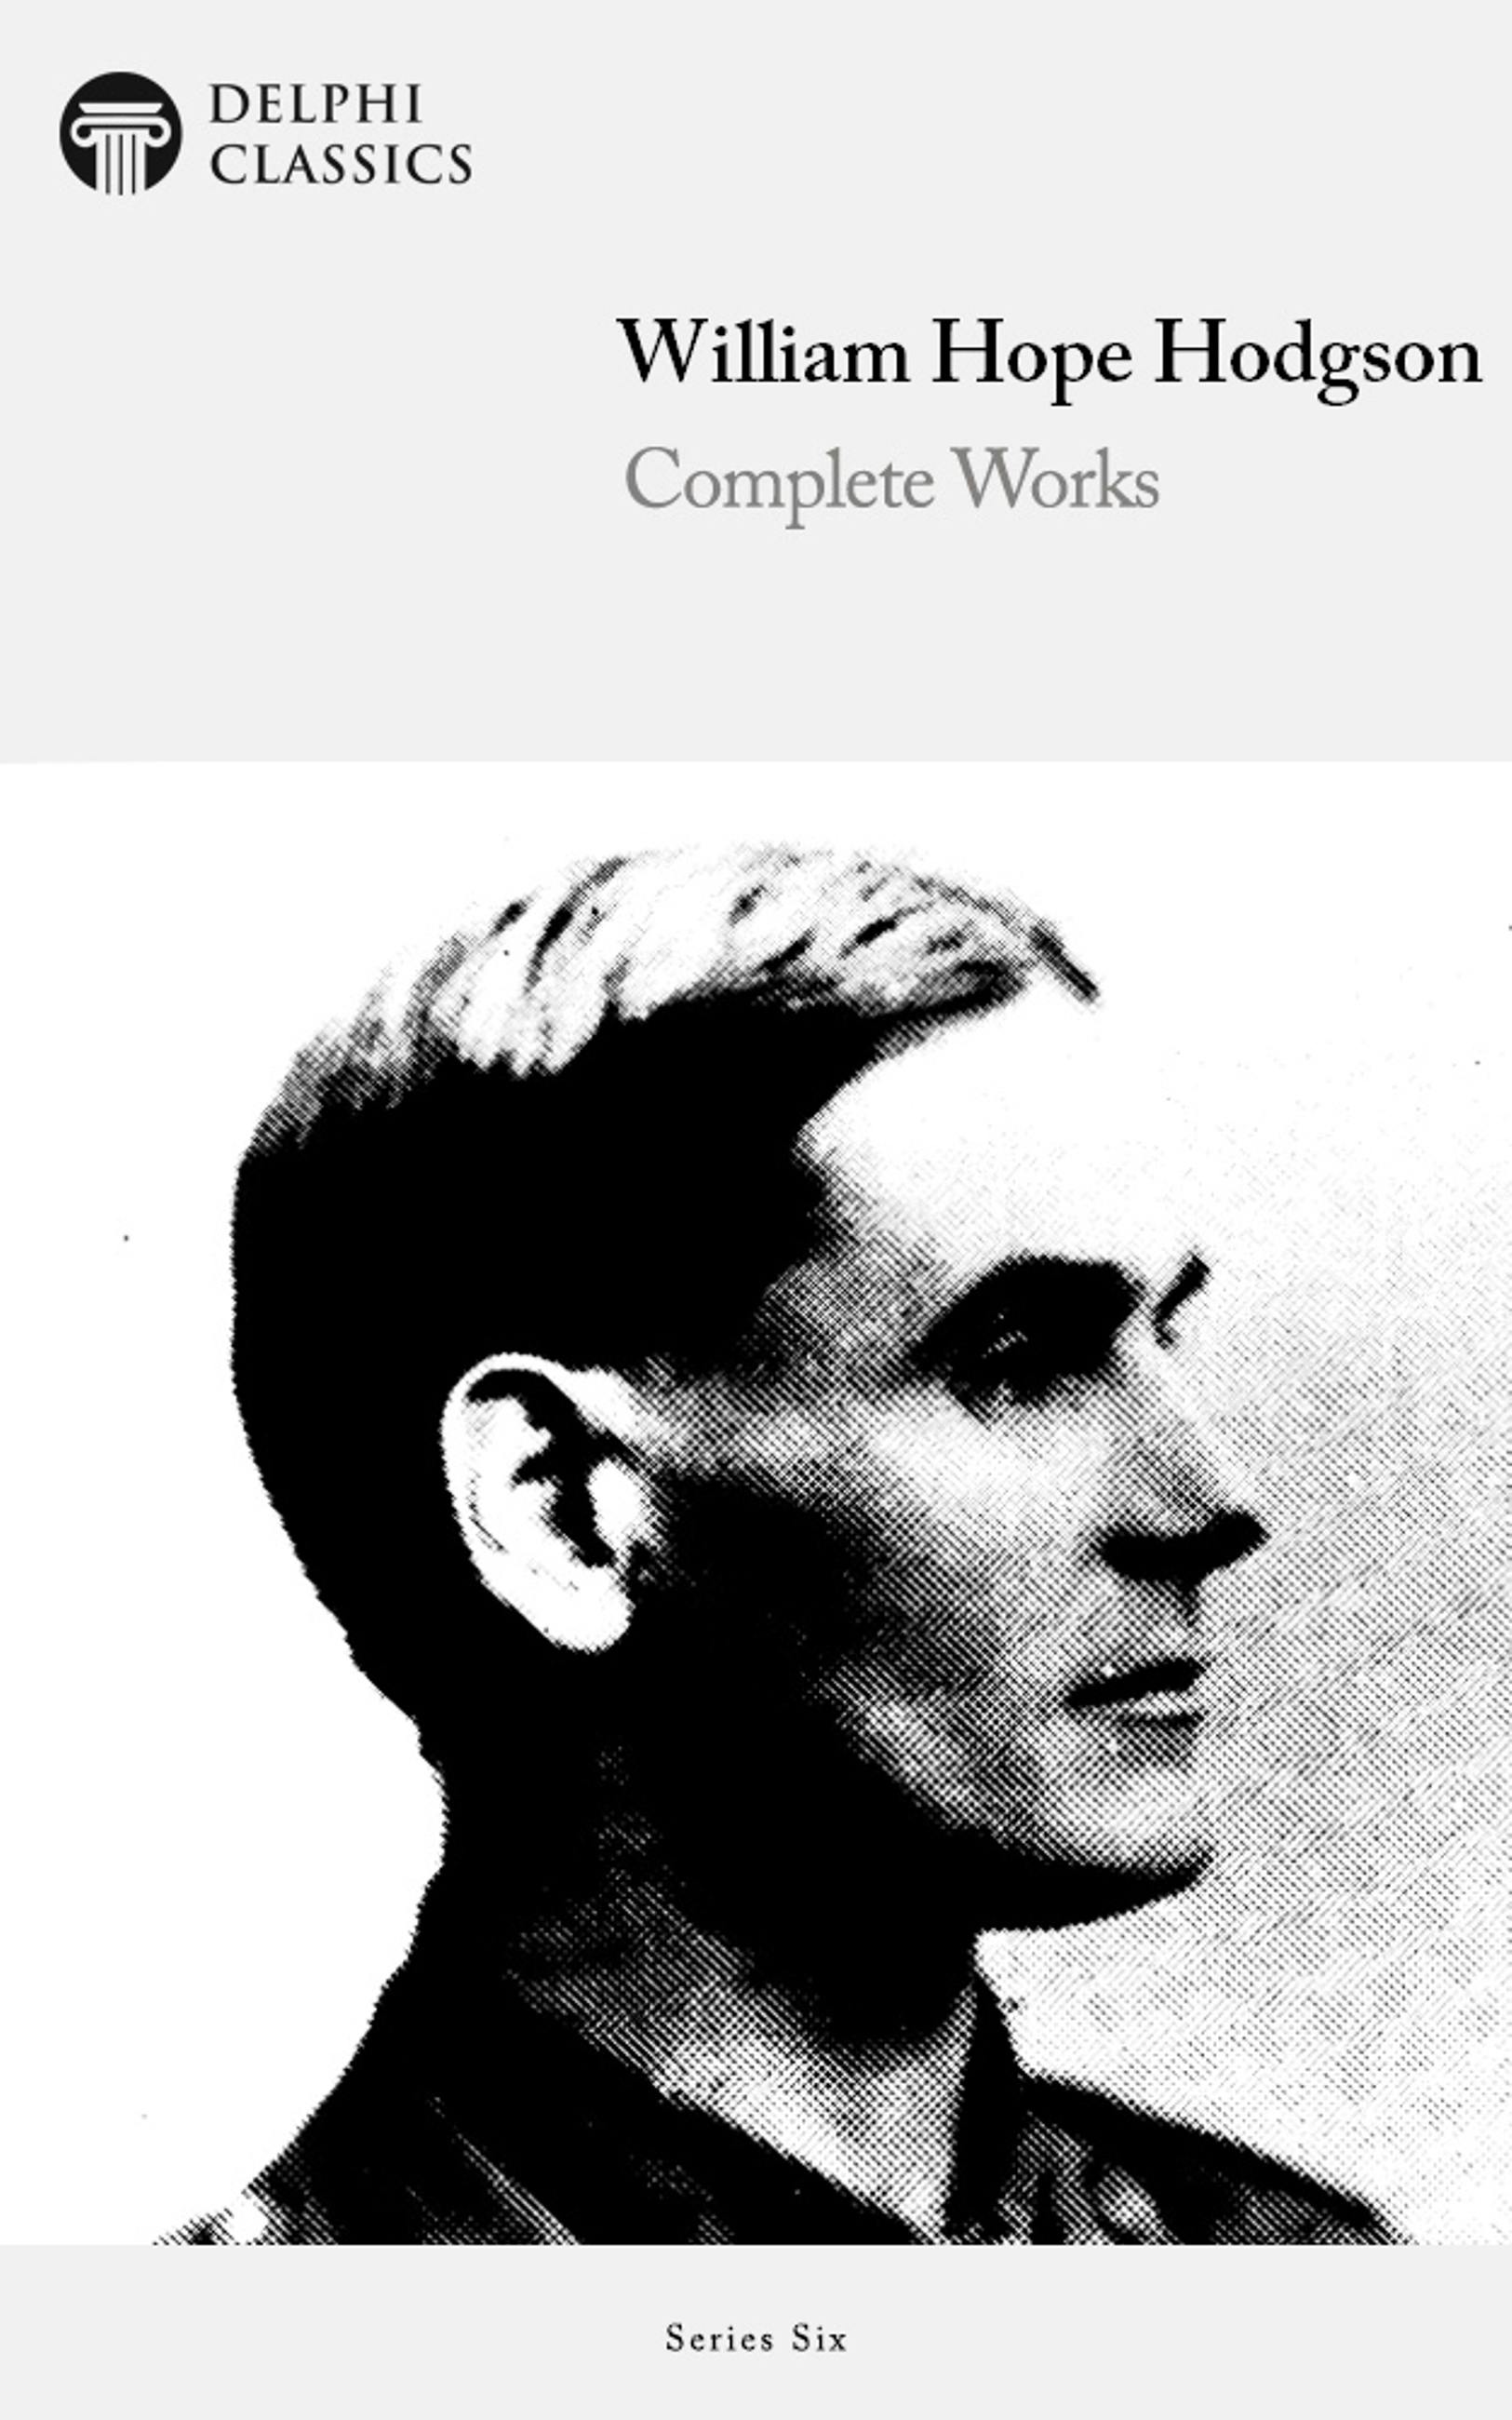 Complete Works of William Hope Hodgson - undefined